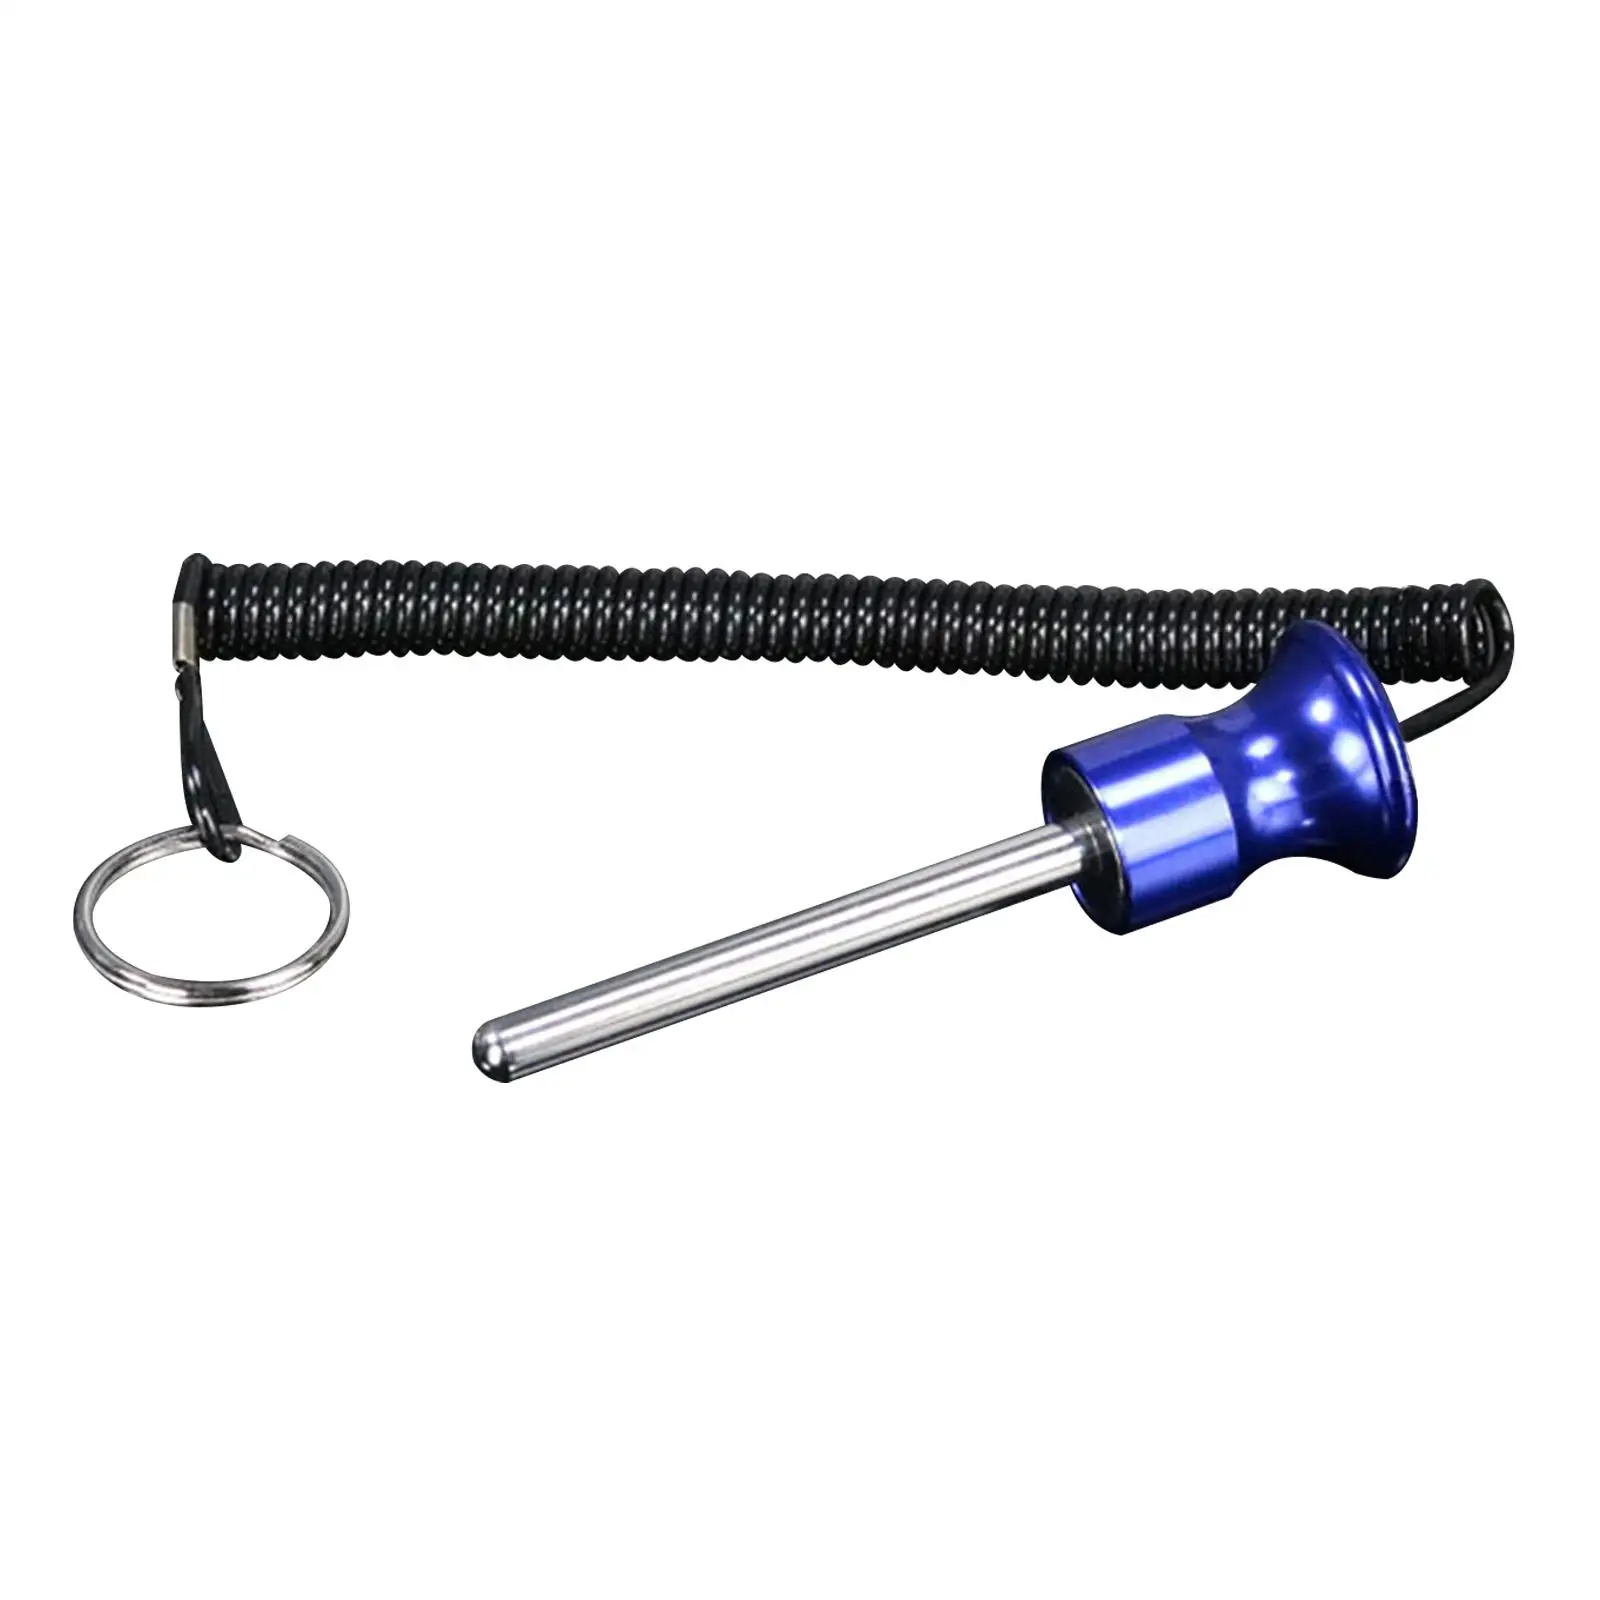  Weight Stack Pin Fitness Exercise Home Gym Detent Selector Pin Locking Cable Gym Equipment Machine